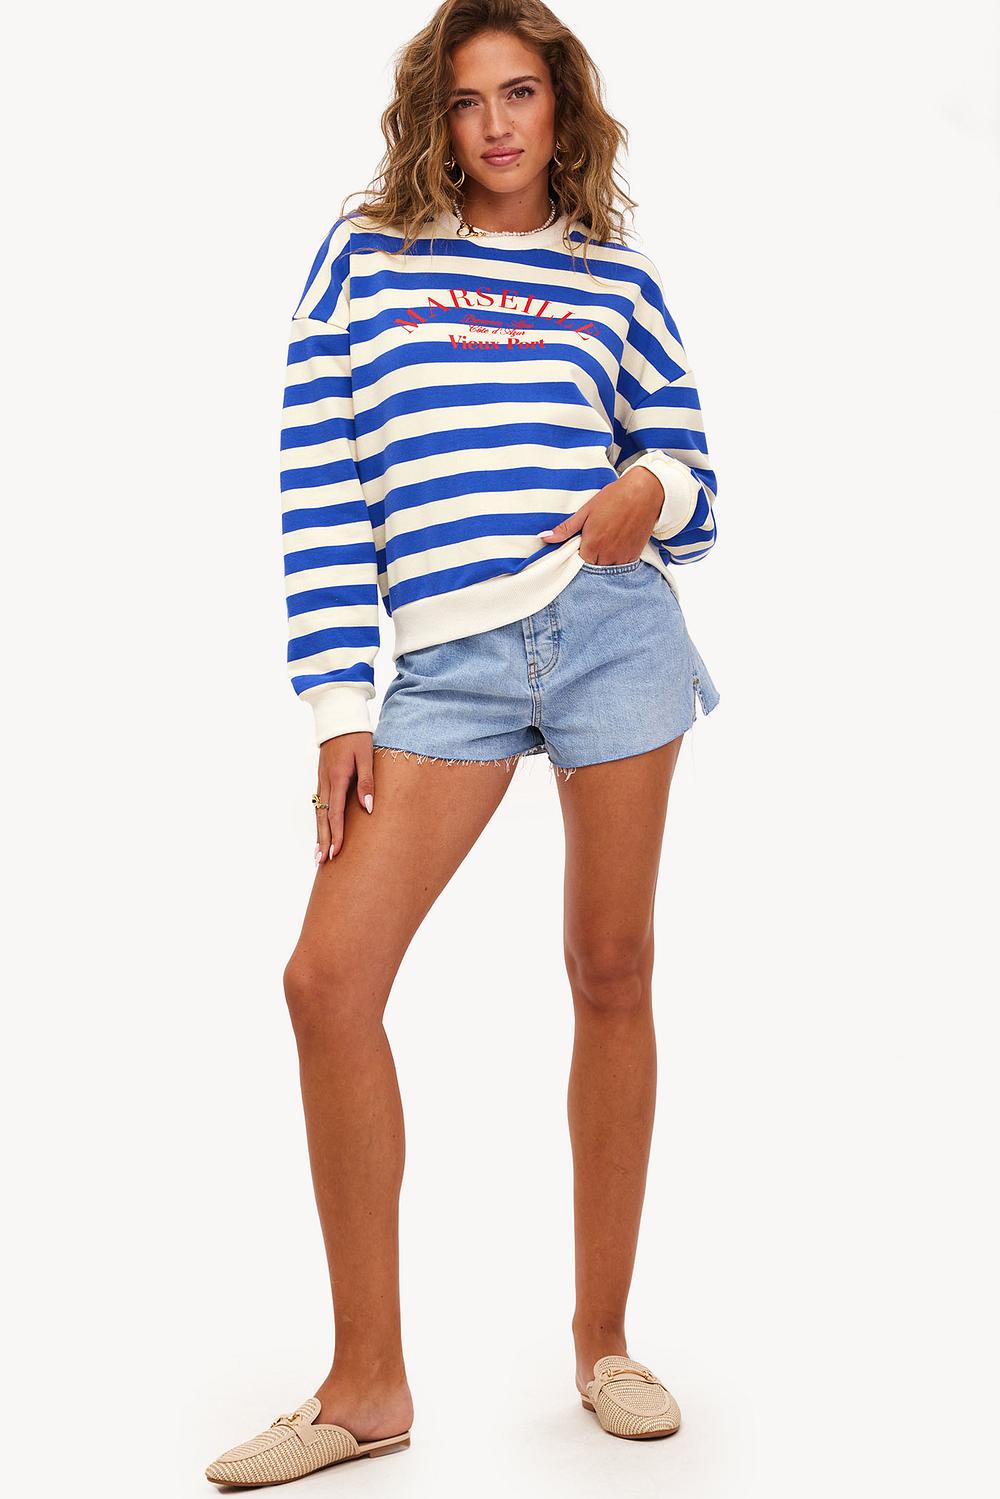 Blue sweater with stripes